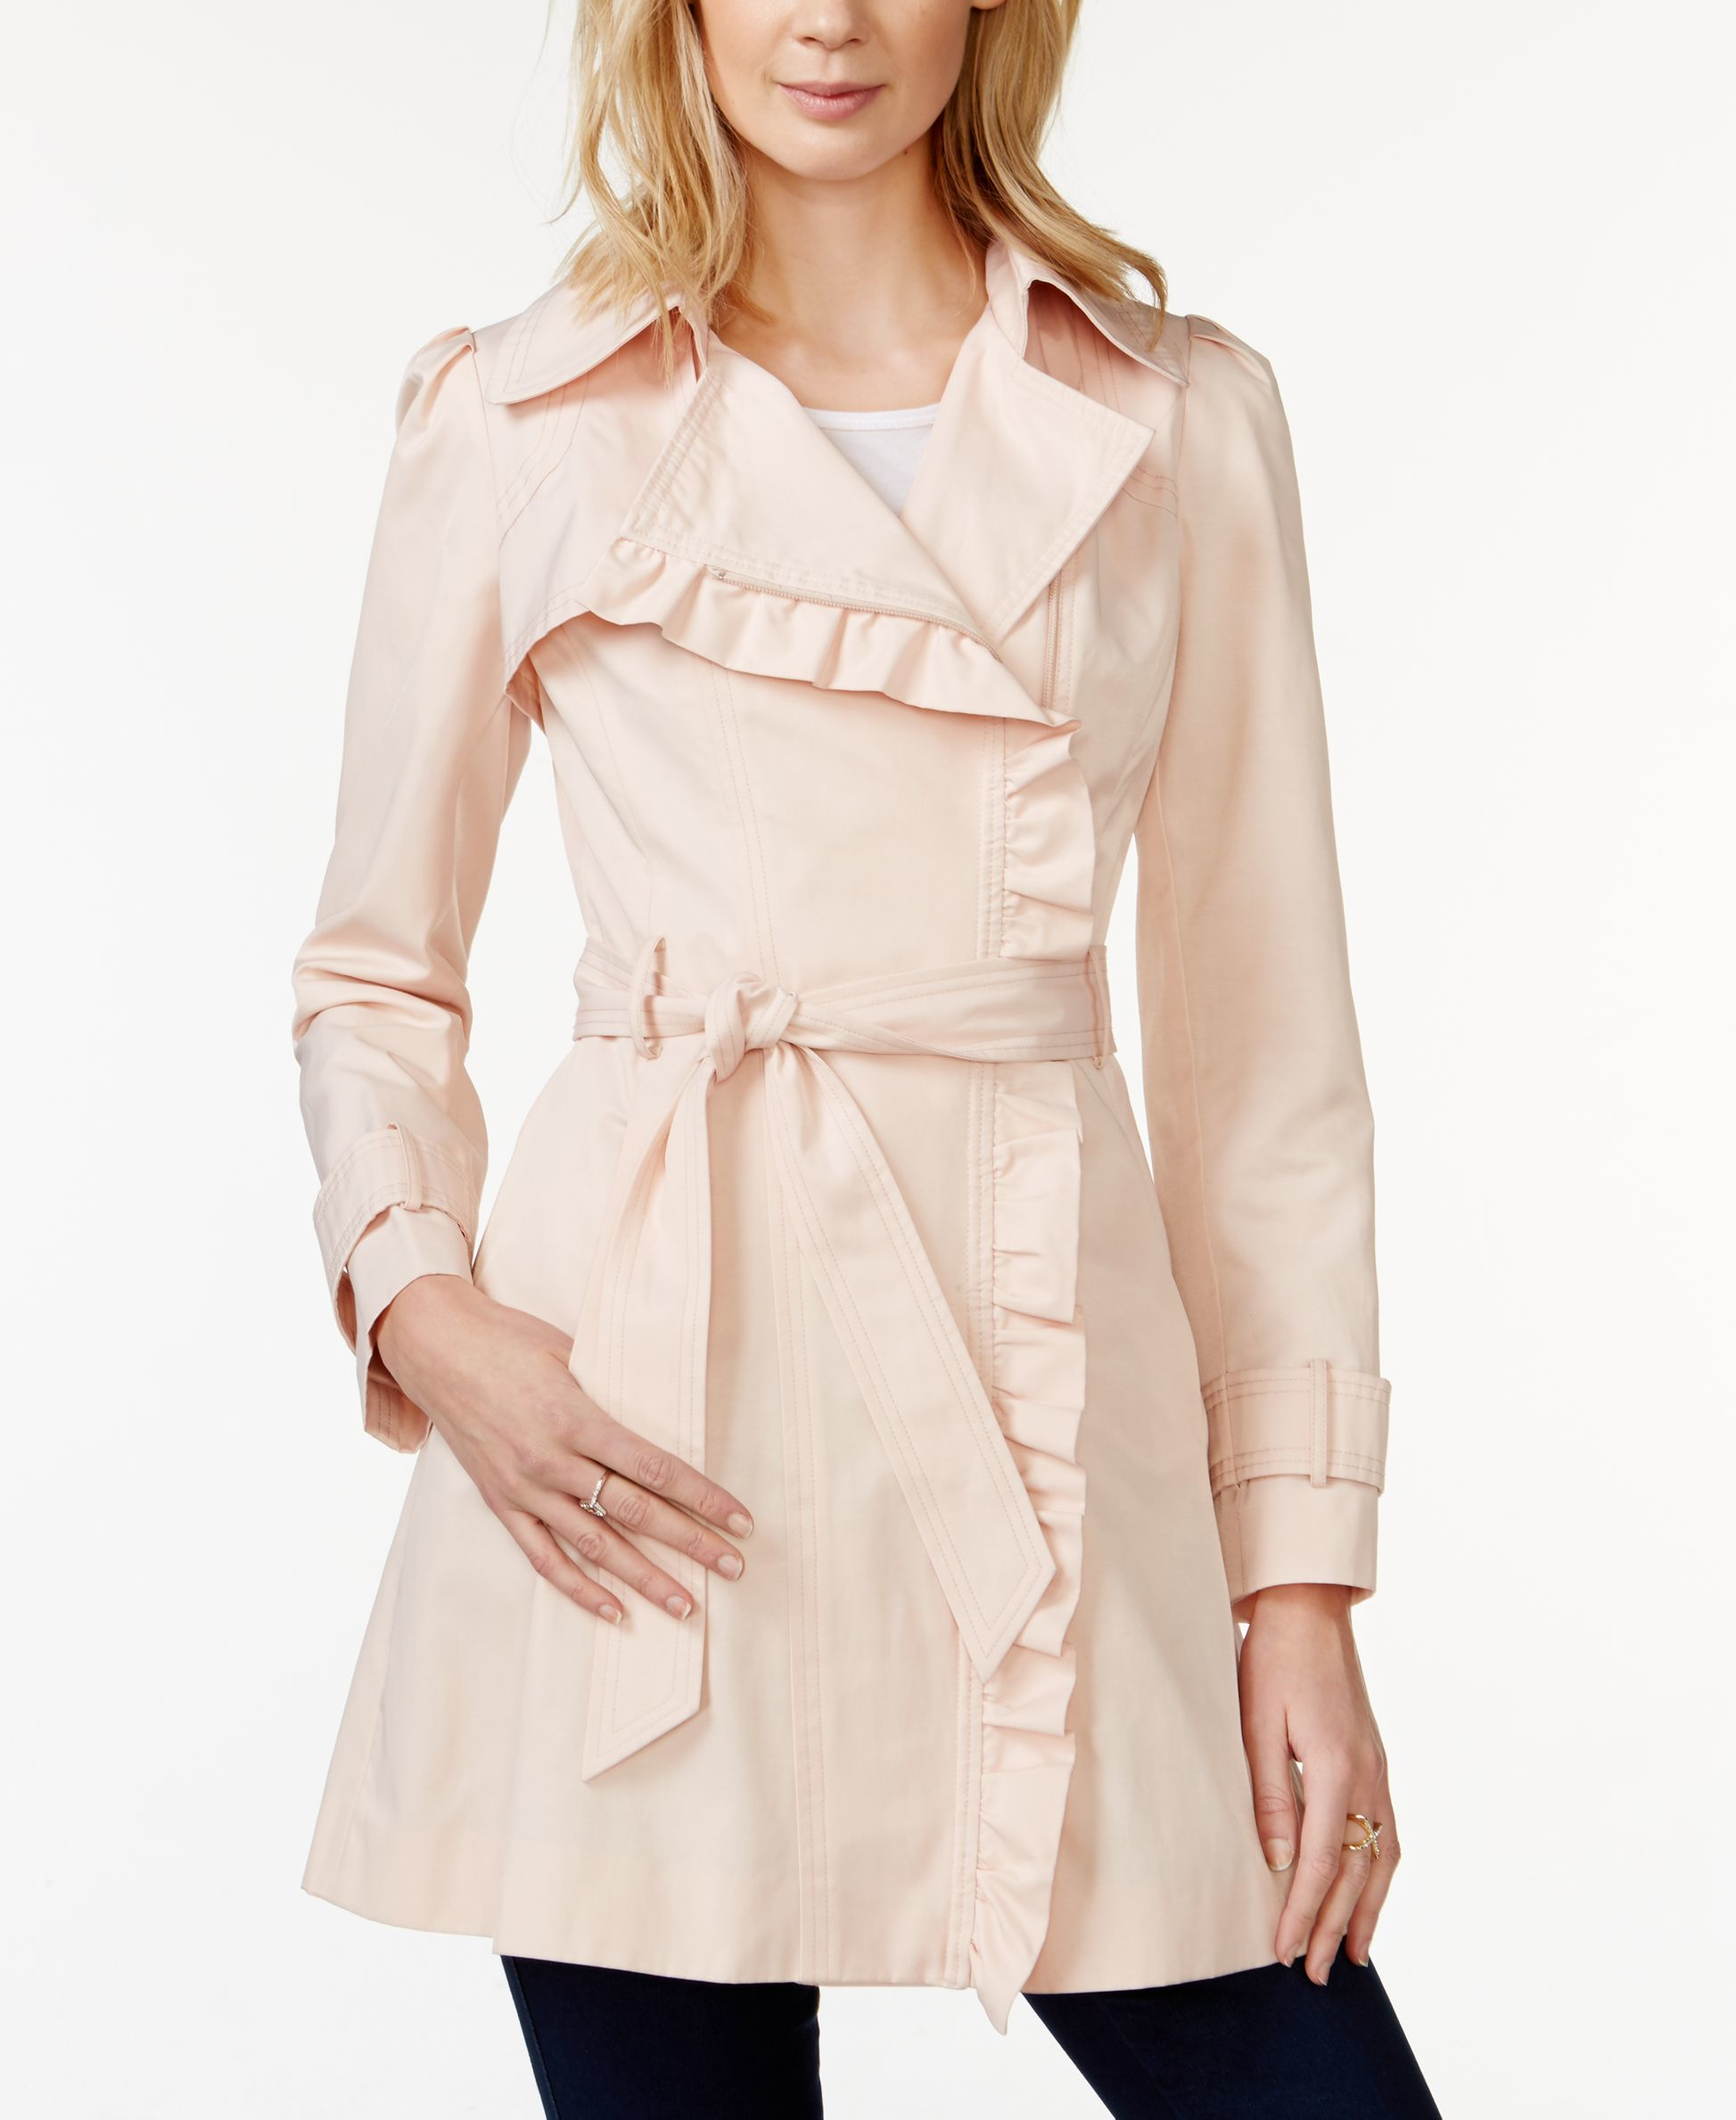 Lyst - Jessica Simpson Ruffled Asymmetrical Trench Coat in Pink